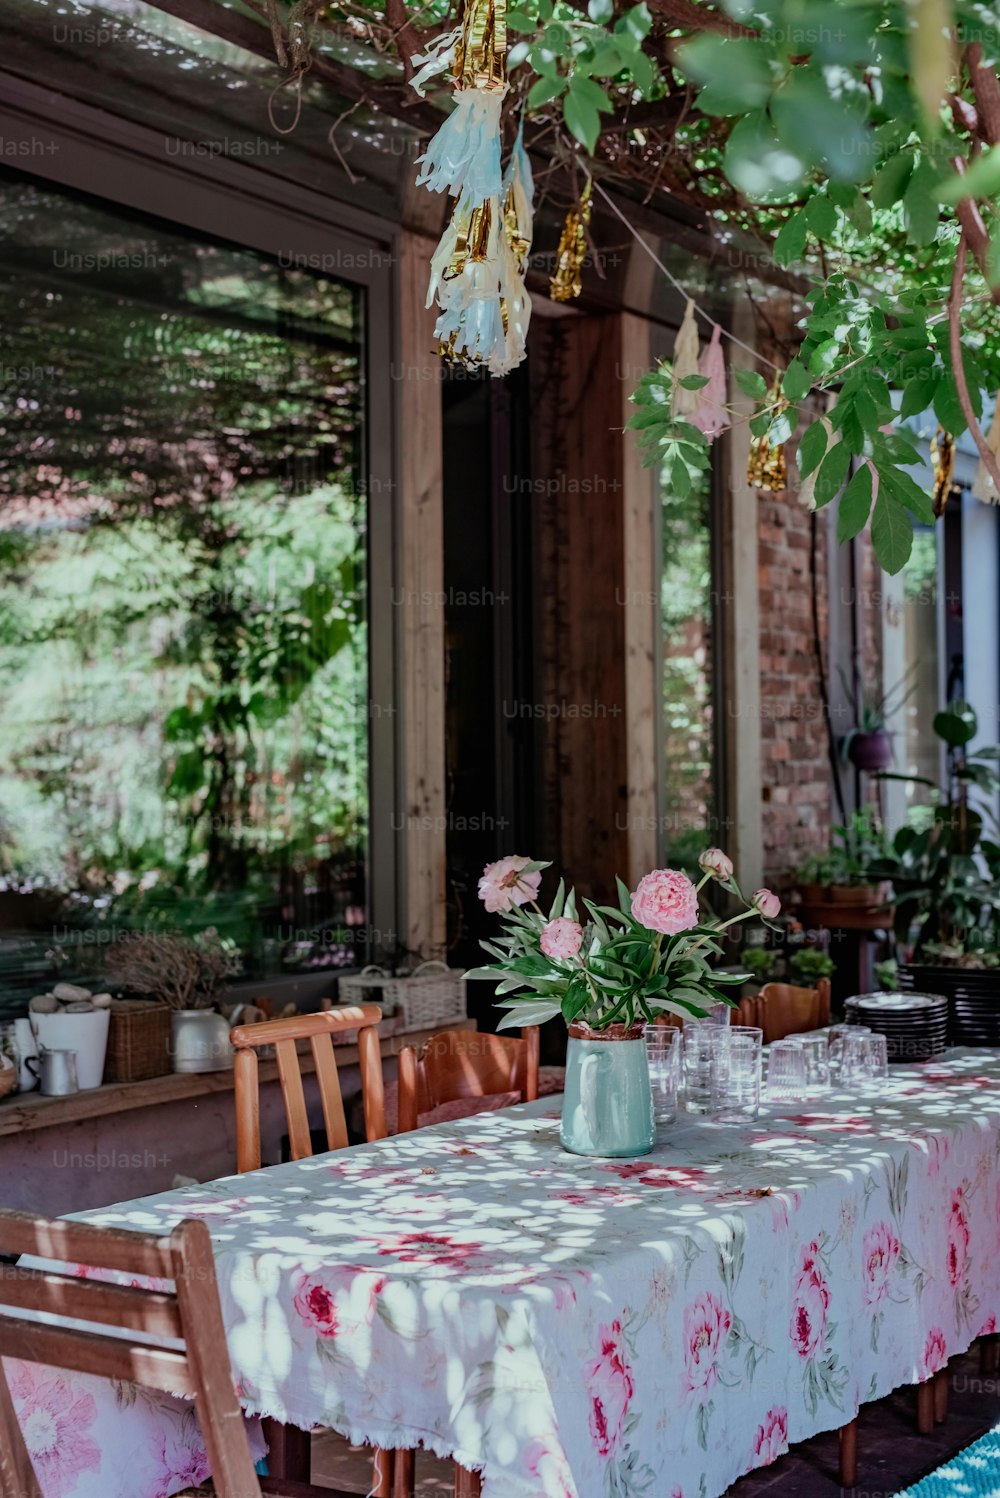 a table with a white and pink table cloth on it